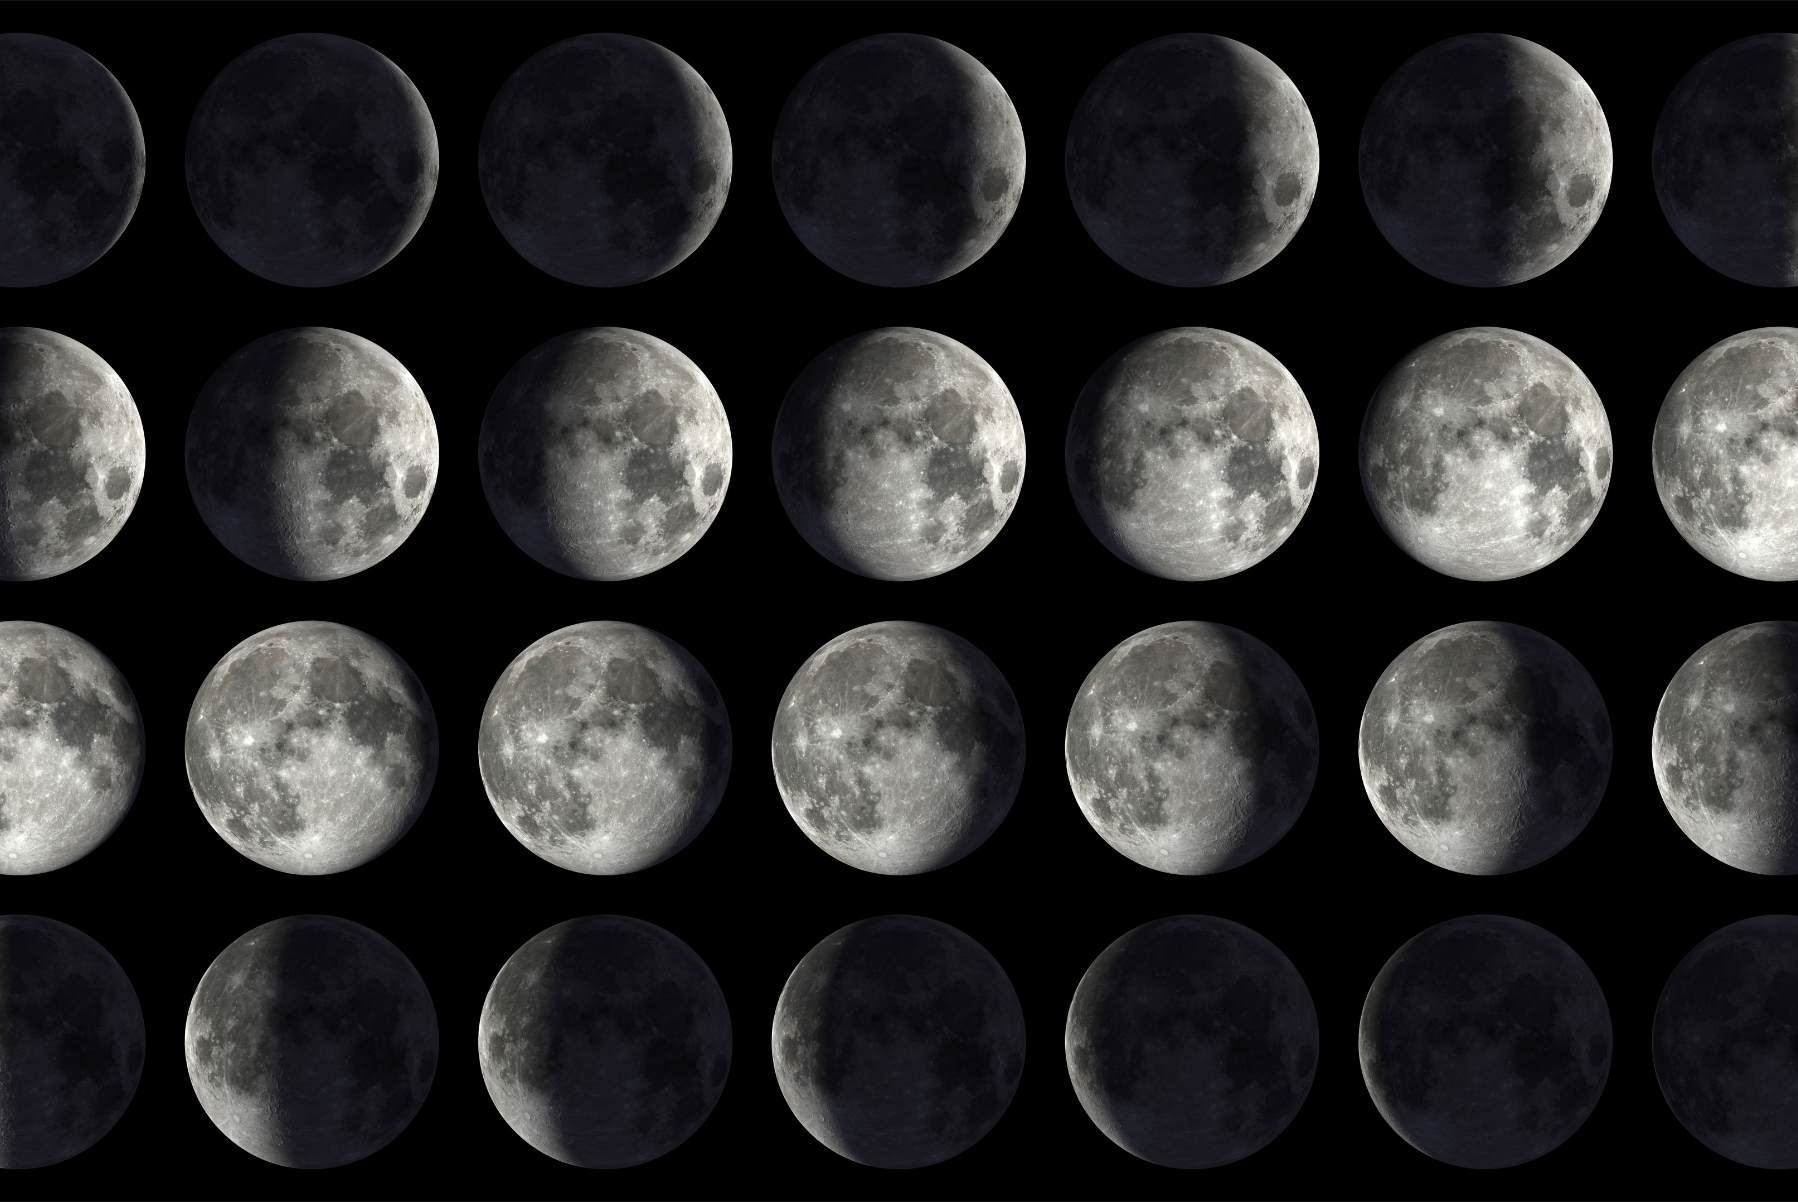 The Moon: Its Phases & Their Meanings